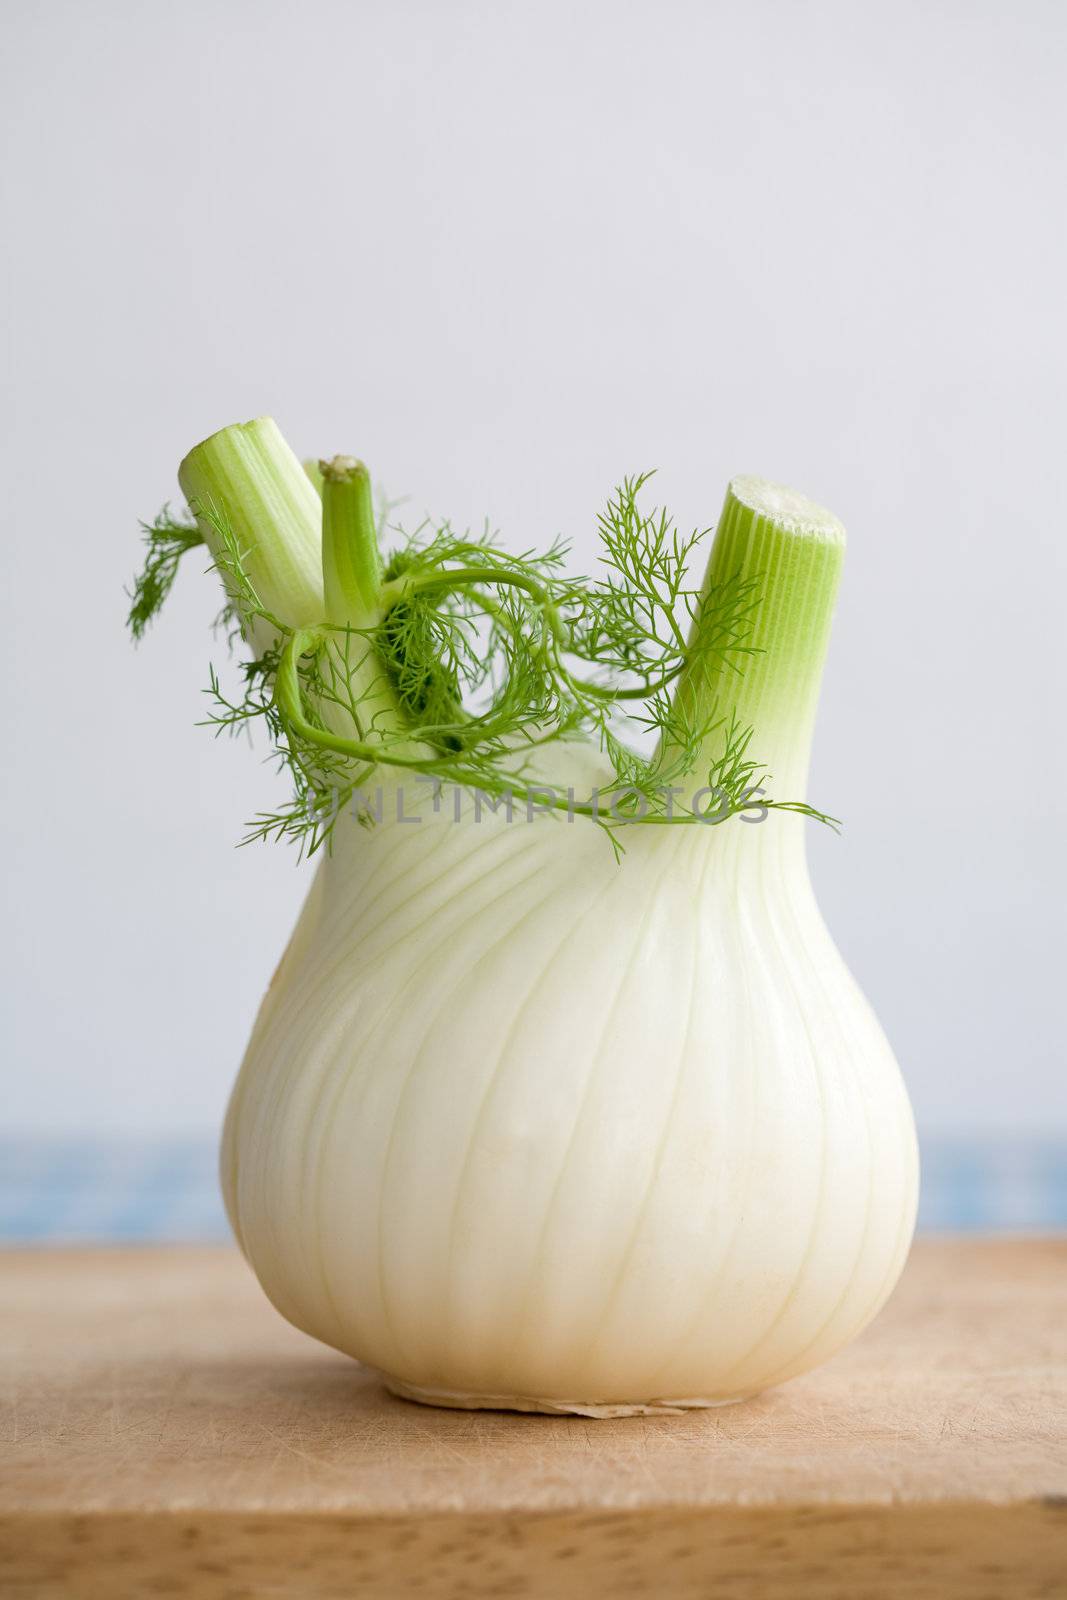 A whole fennel on a wooden chopping board